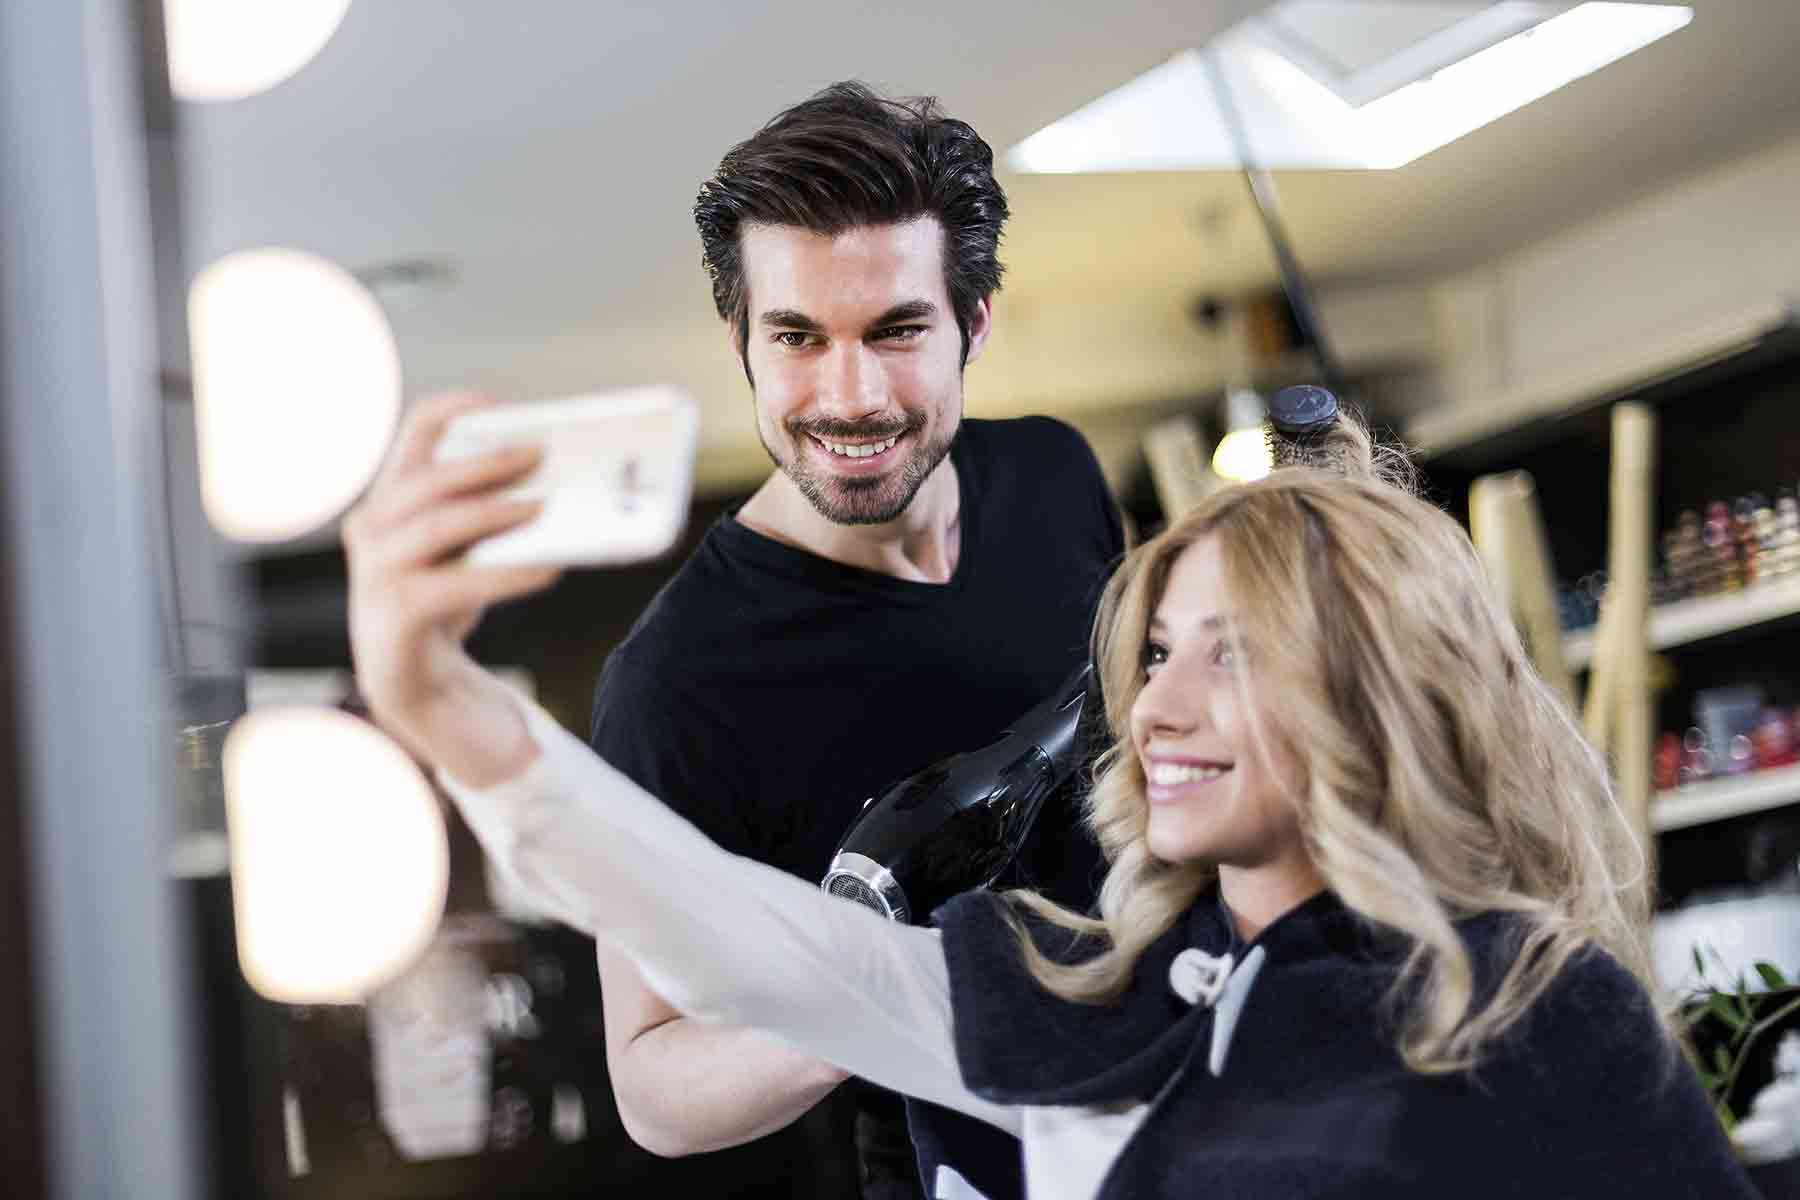 Girl taking a selfie with a hairdresser